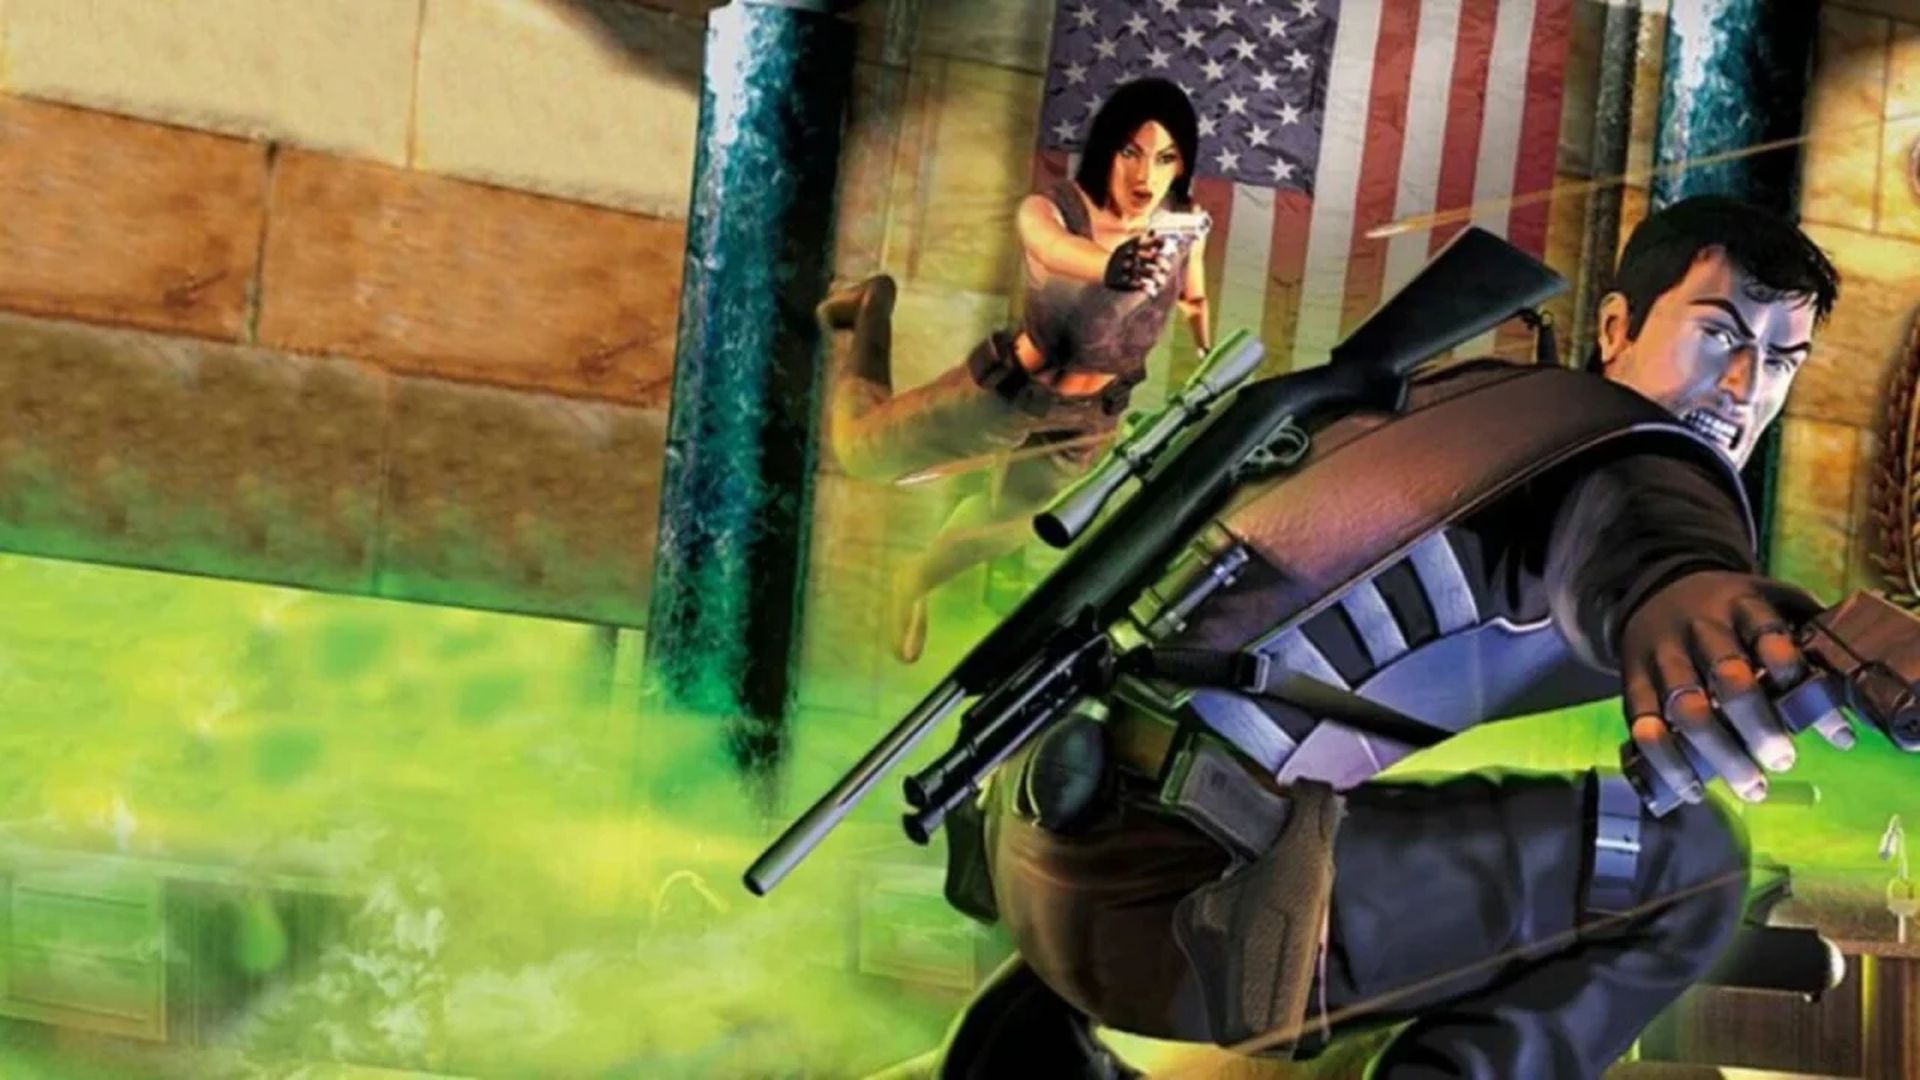 Syphon Filter 3 Rated for Release on PS4, PS5 in South Korea